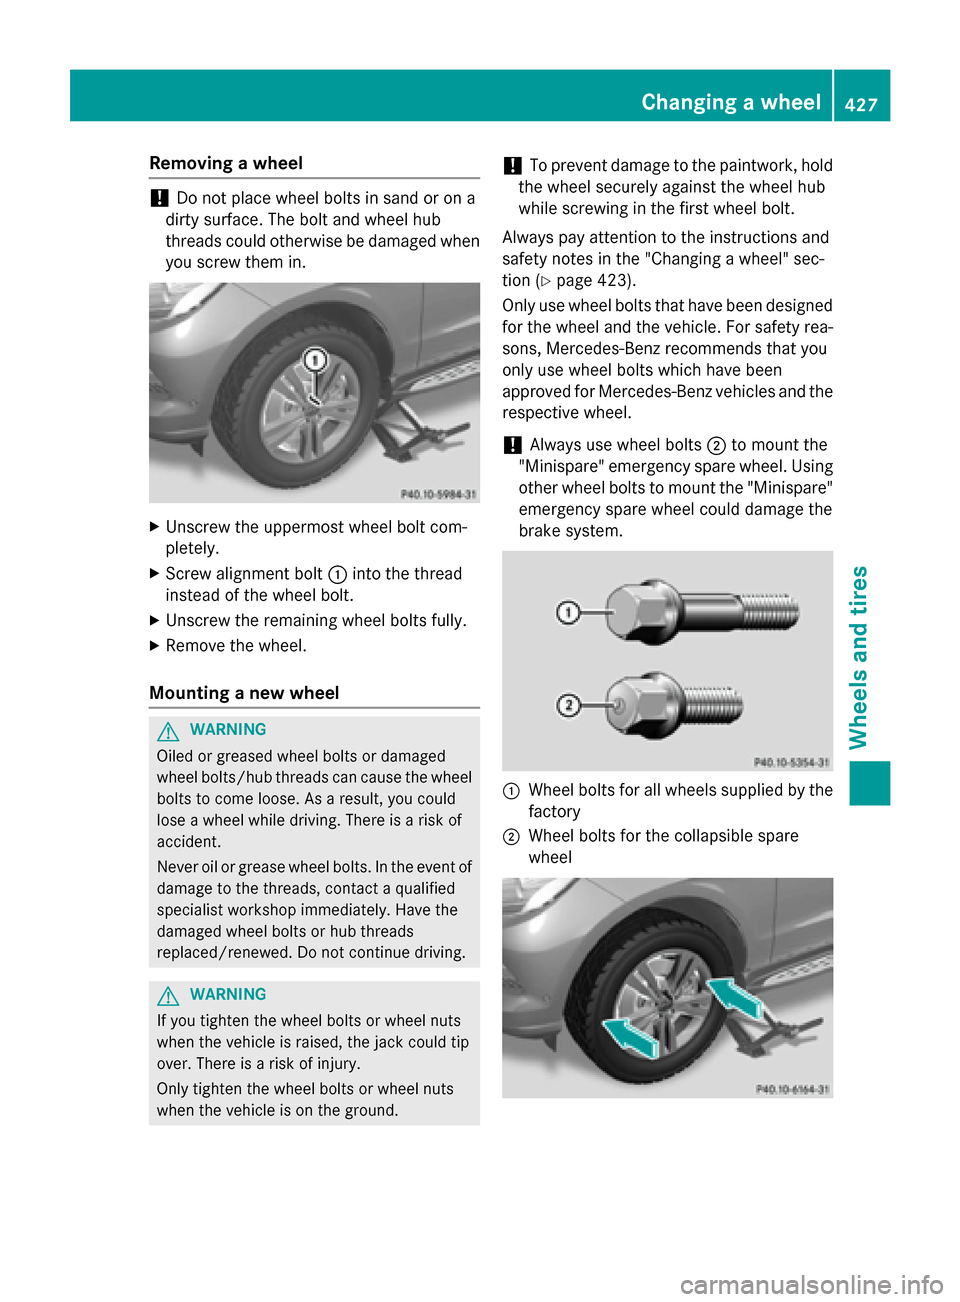 MERCEDES-BENZ M-Class 2015 W166 Owners Manual Removing a wheel
!
Do not place wheel bolts in sand or on a
dirty surface. The bolt and wheel hub
threads could otherwise be damaged when you screw them in. X
Unscrew the uppermost wheel bolt com-
ple